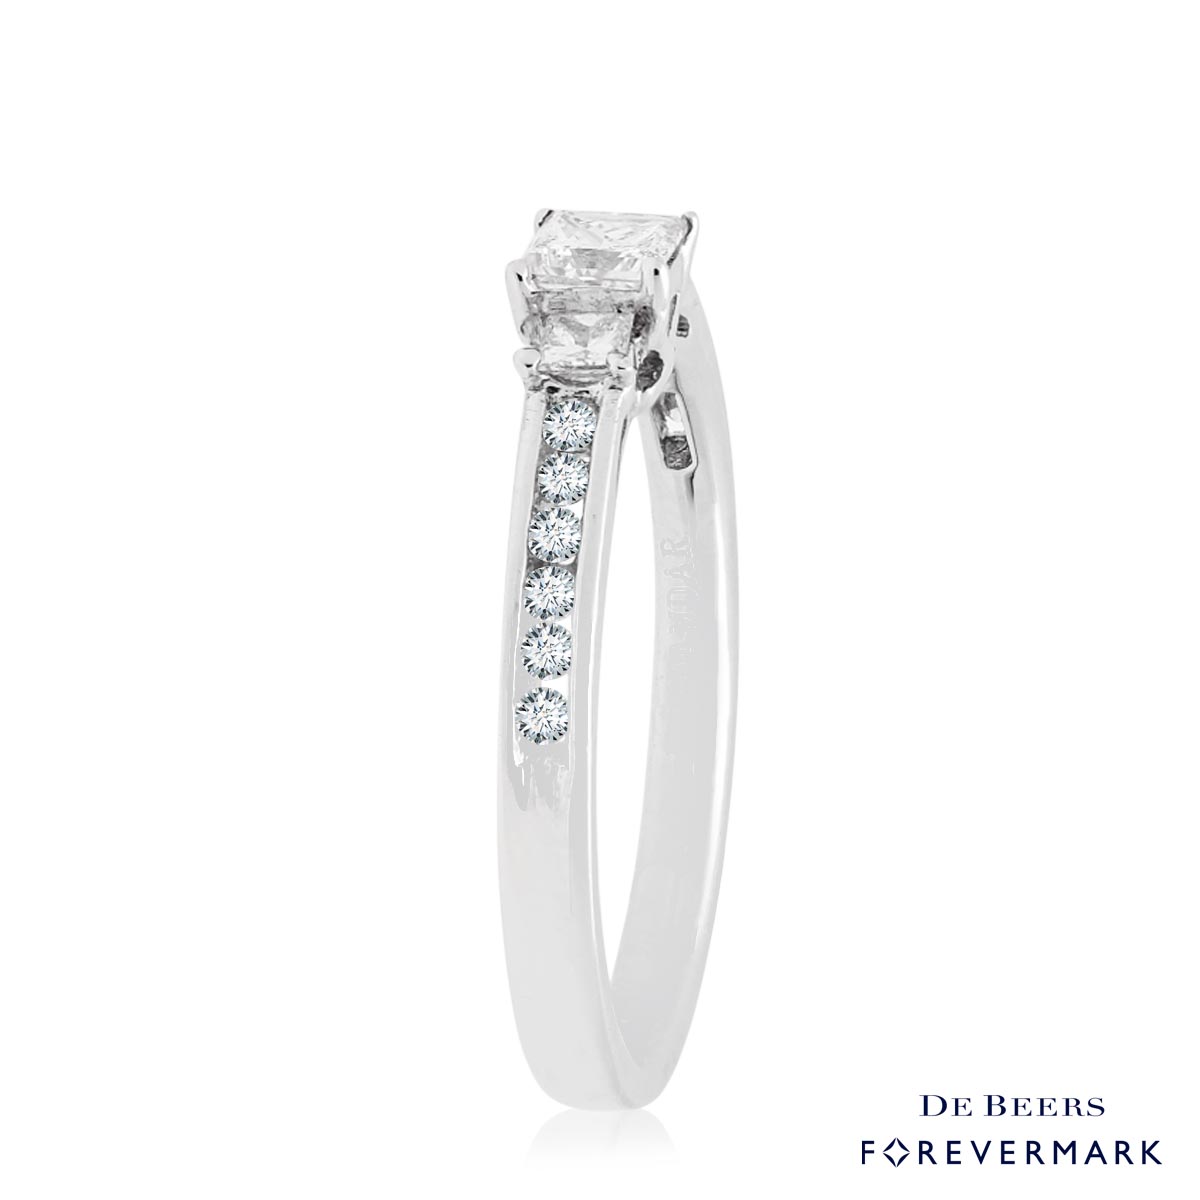 De Beers Forevermark Three Stone Diamond Ring in 18kt White Gold (1/2ct tw)